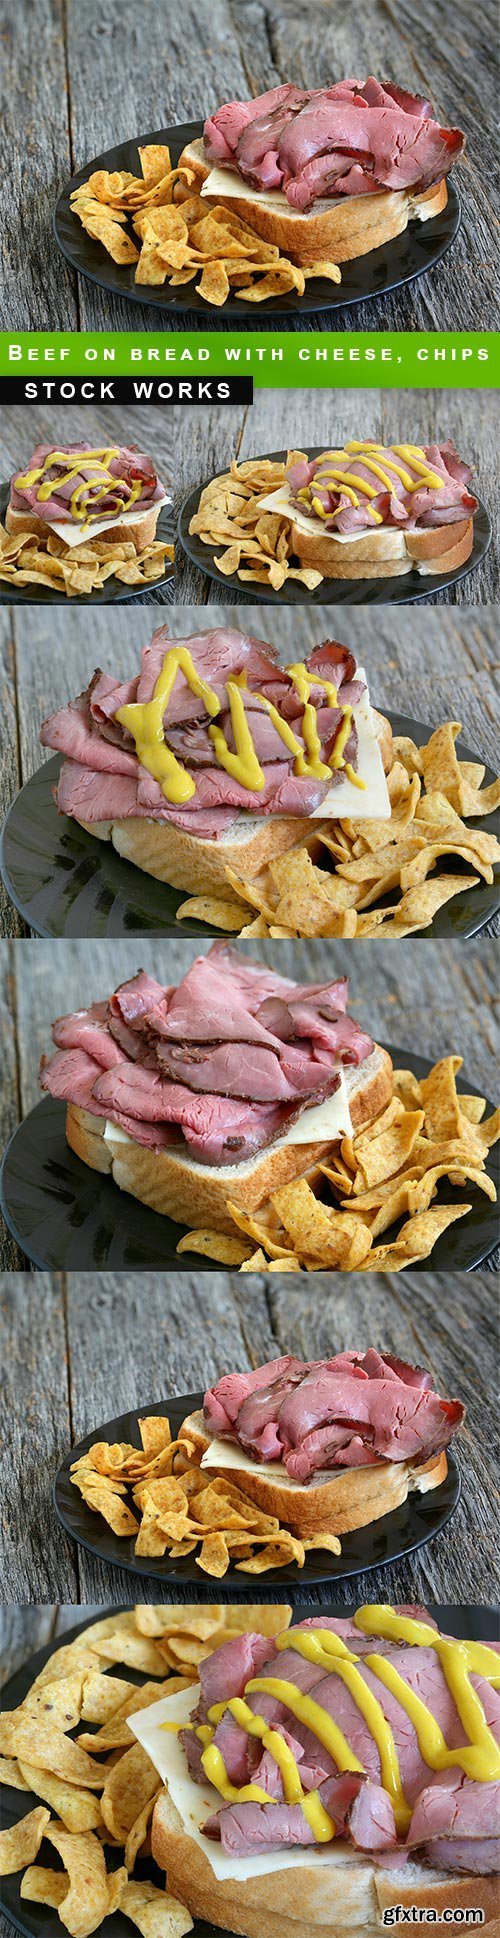 Beef on bread with cheese, chips